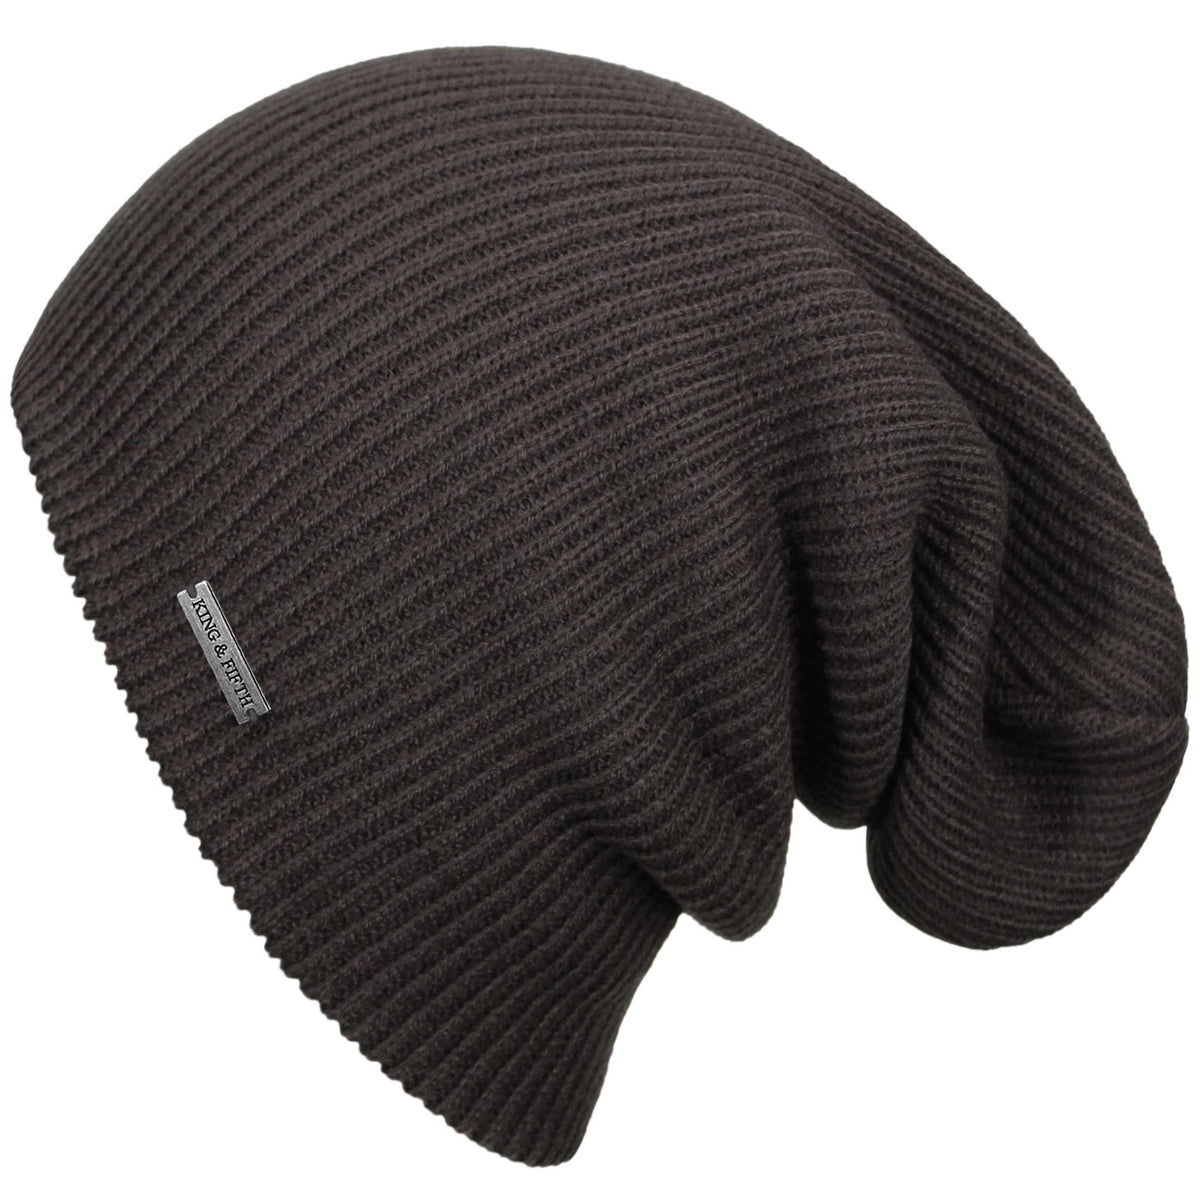 Hat - Fifth Beanie Mens The Extra K&F Forte Large - Beanie Slouchy - XL and King Supply Mens